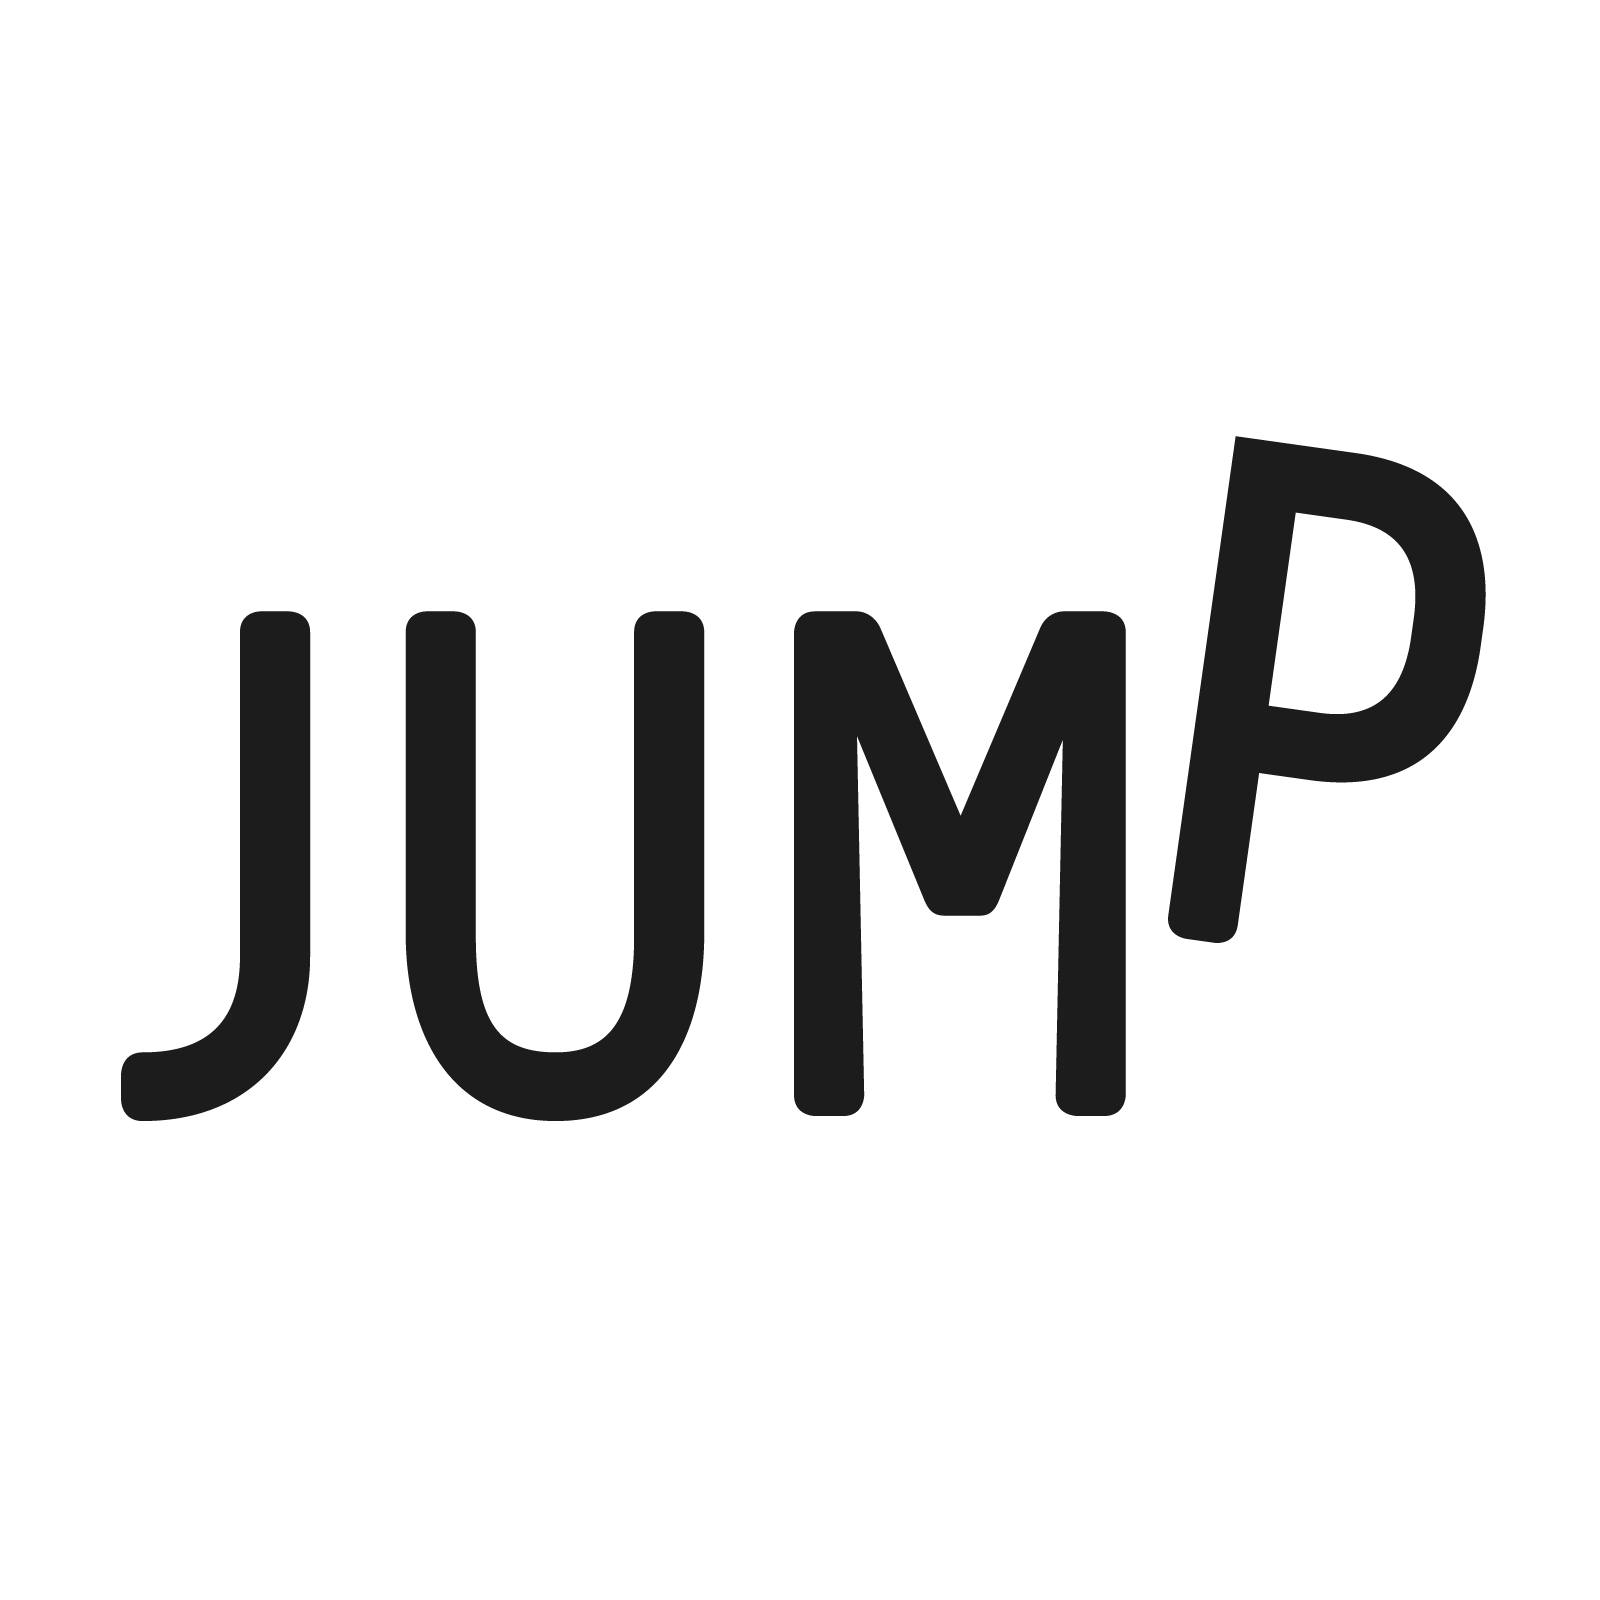 Image result for Youth-Environment-Platform (JUMP)